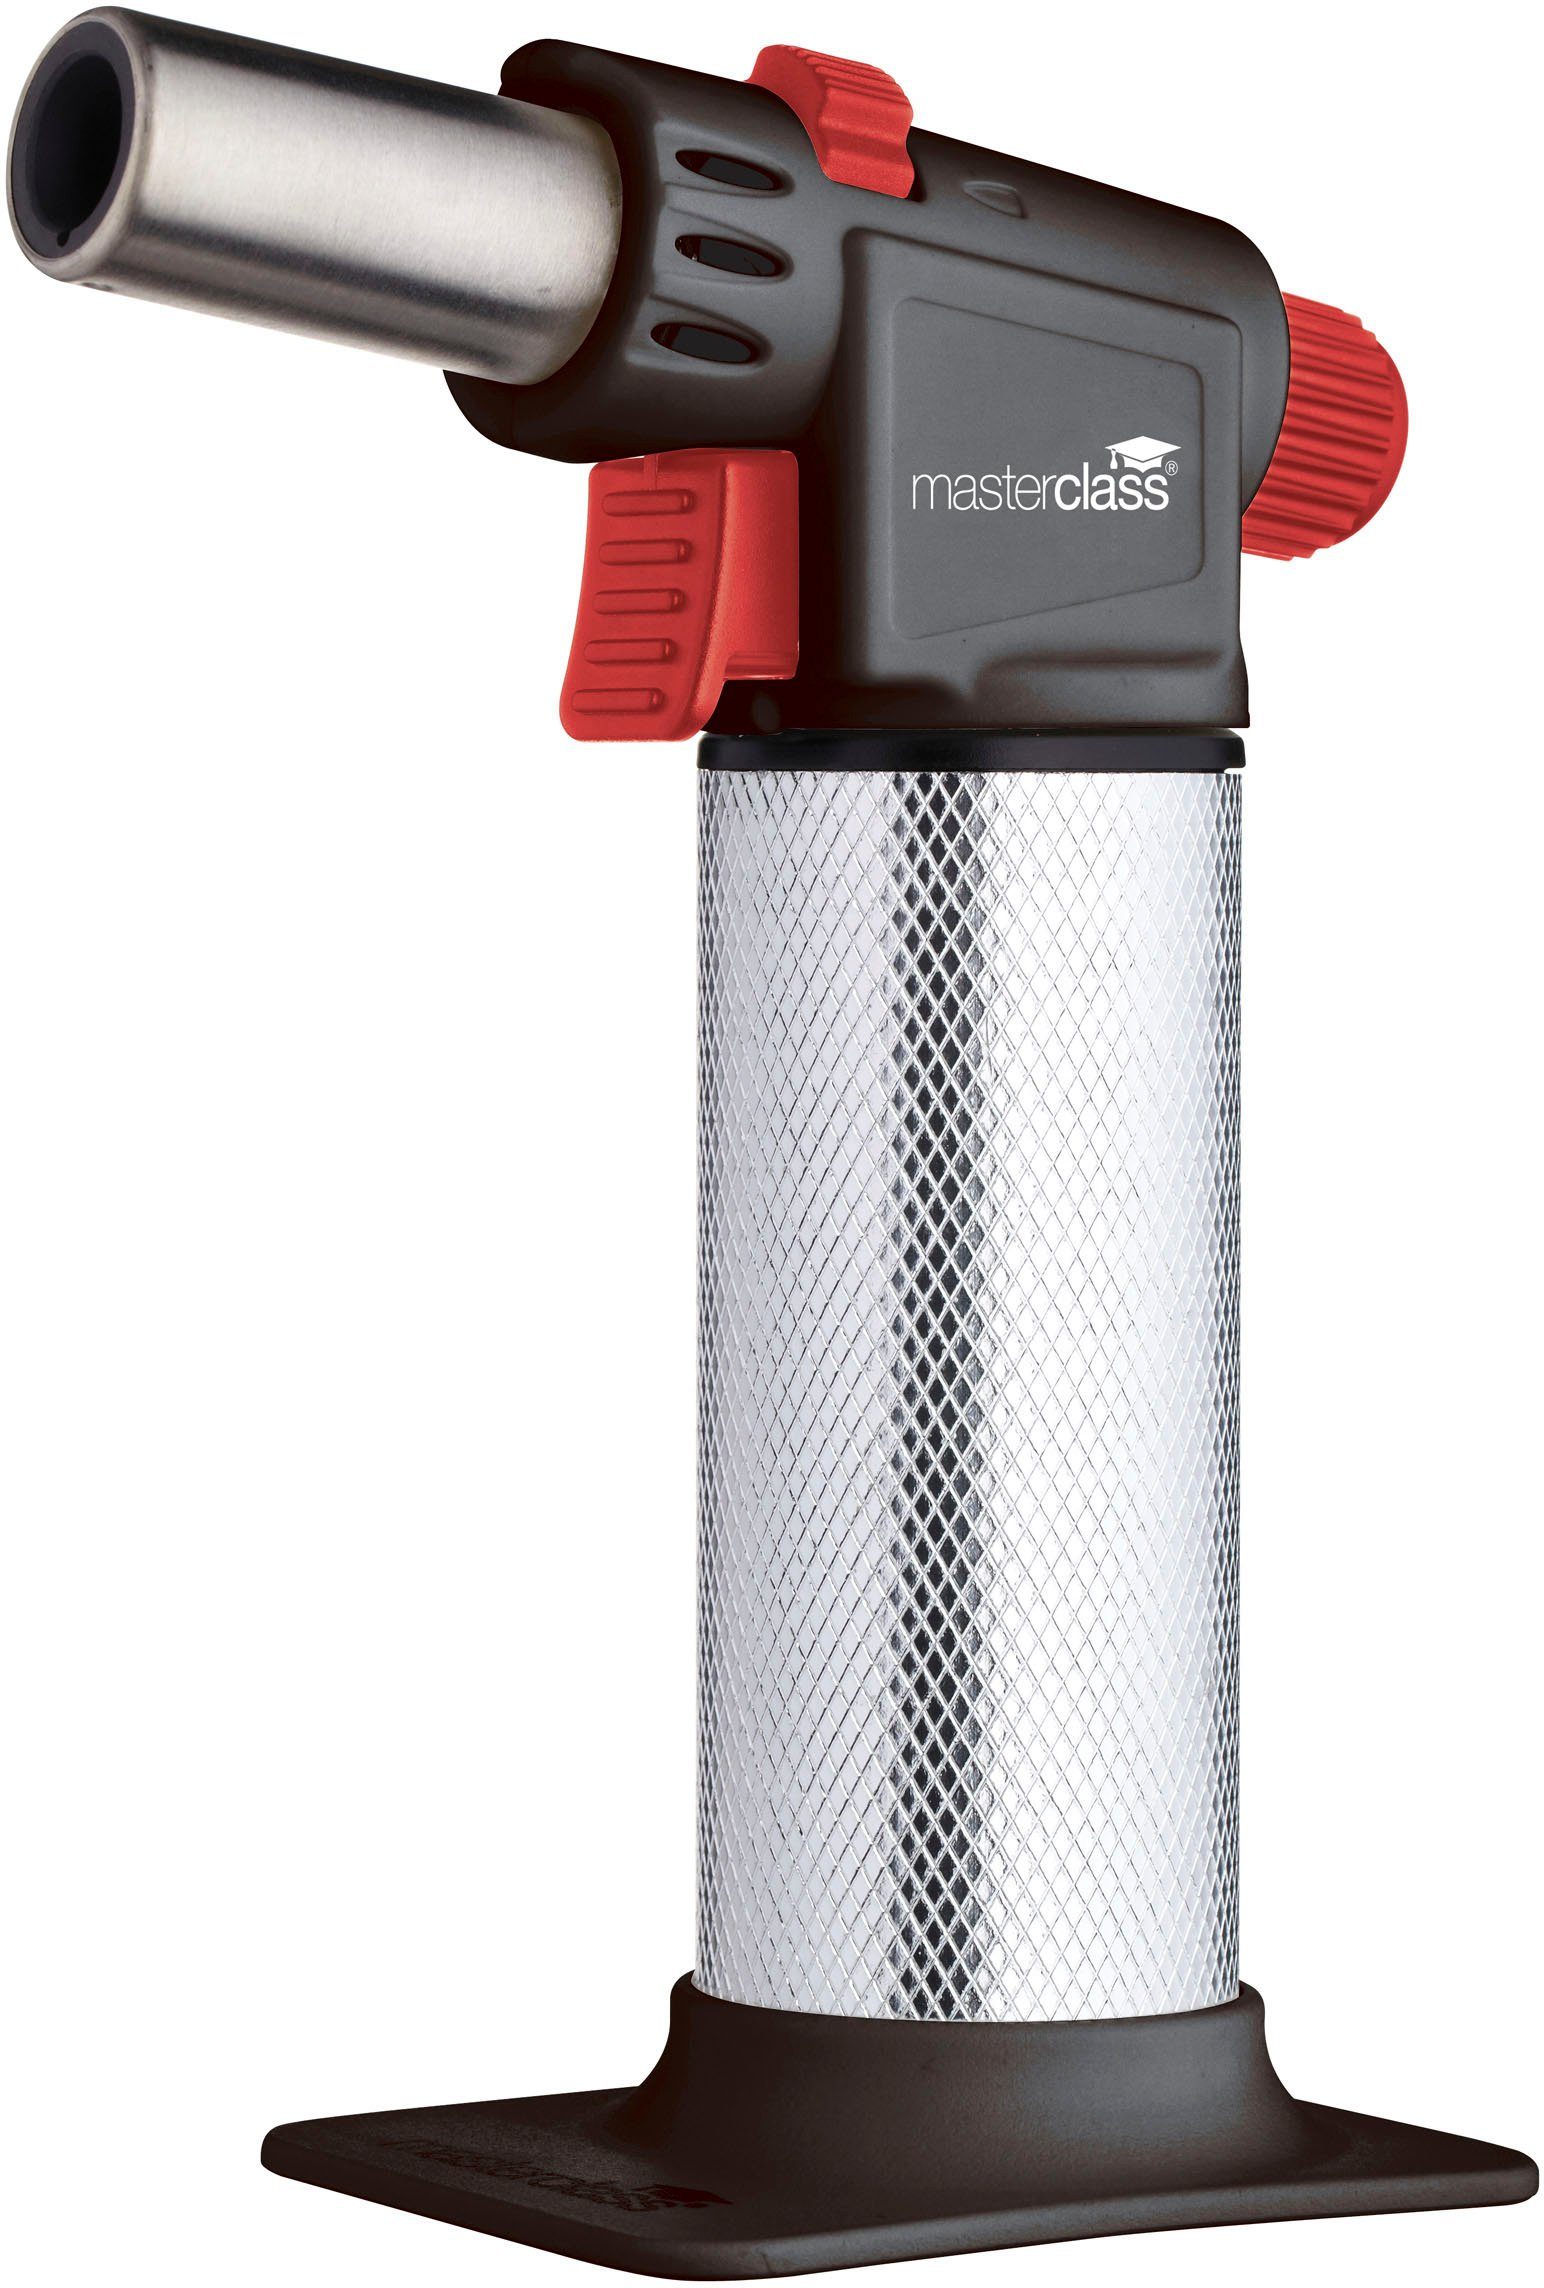 Blowtorch, Cook's MasterClass Professional (1-tlg) Flambierbrenner